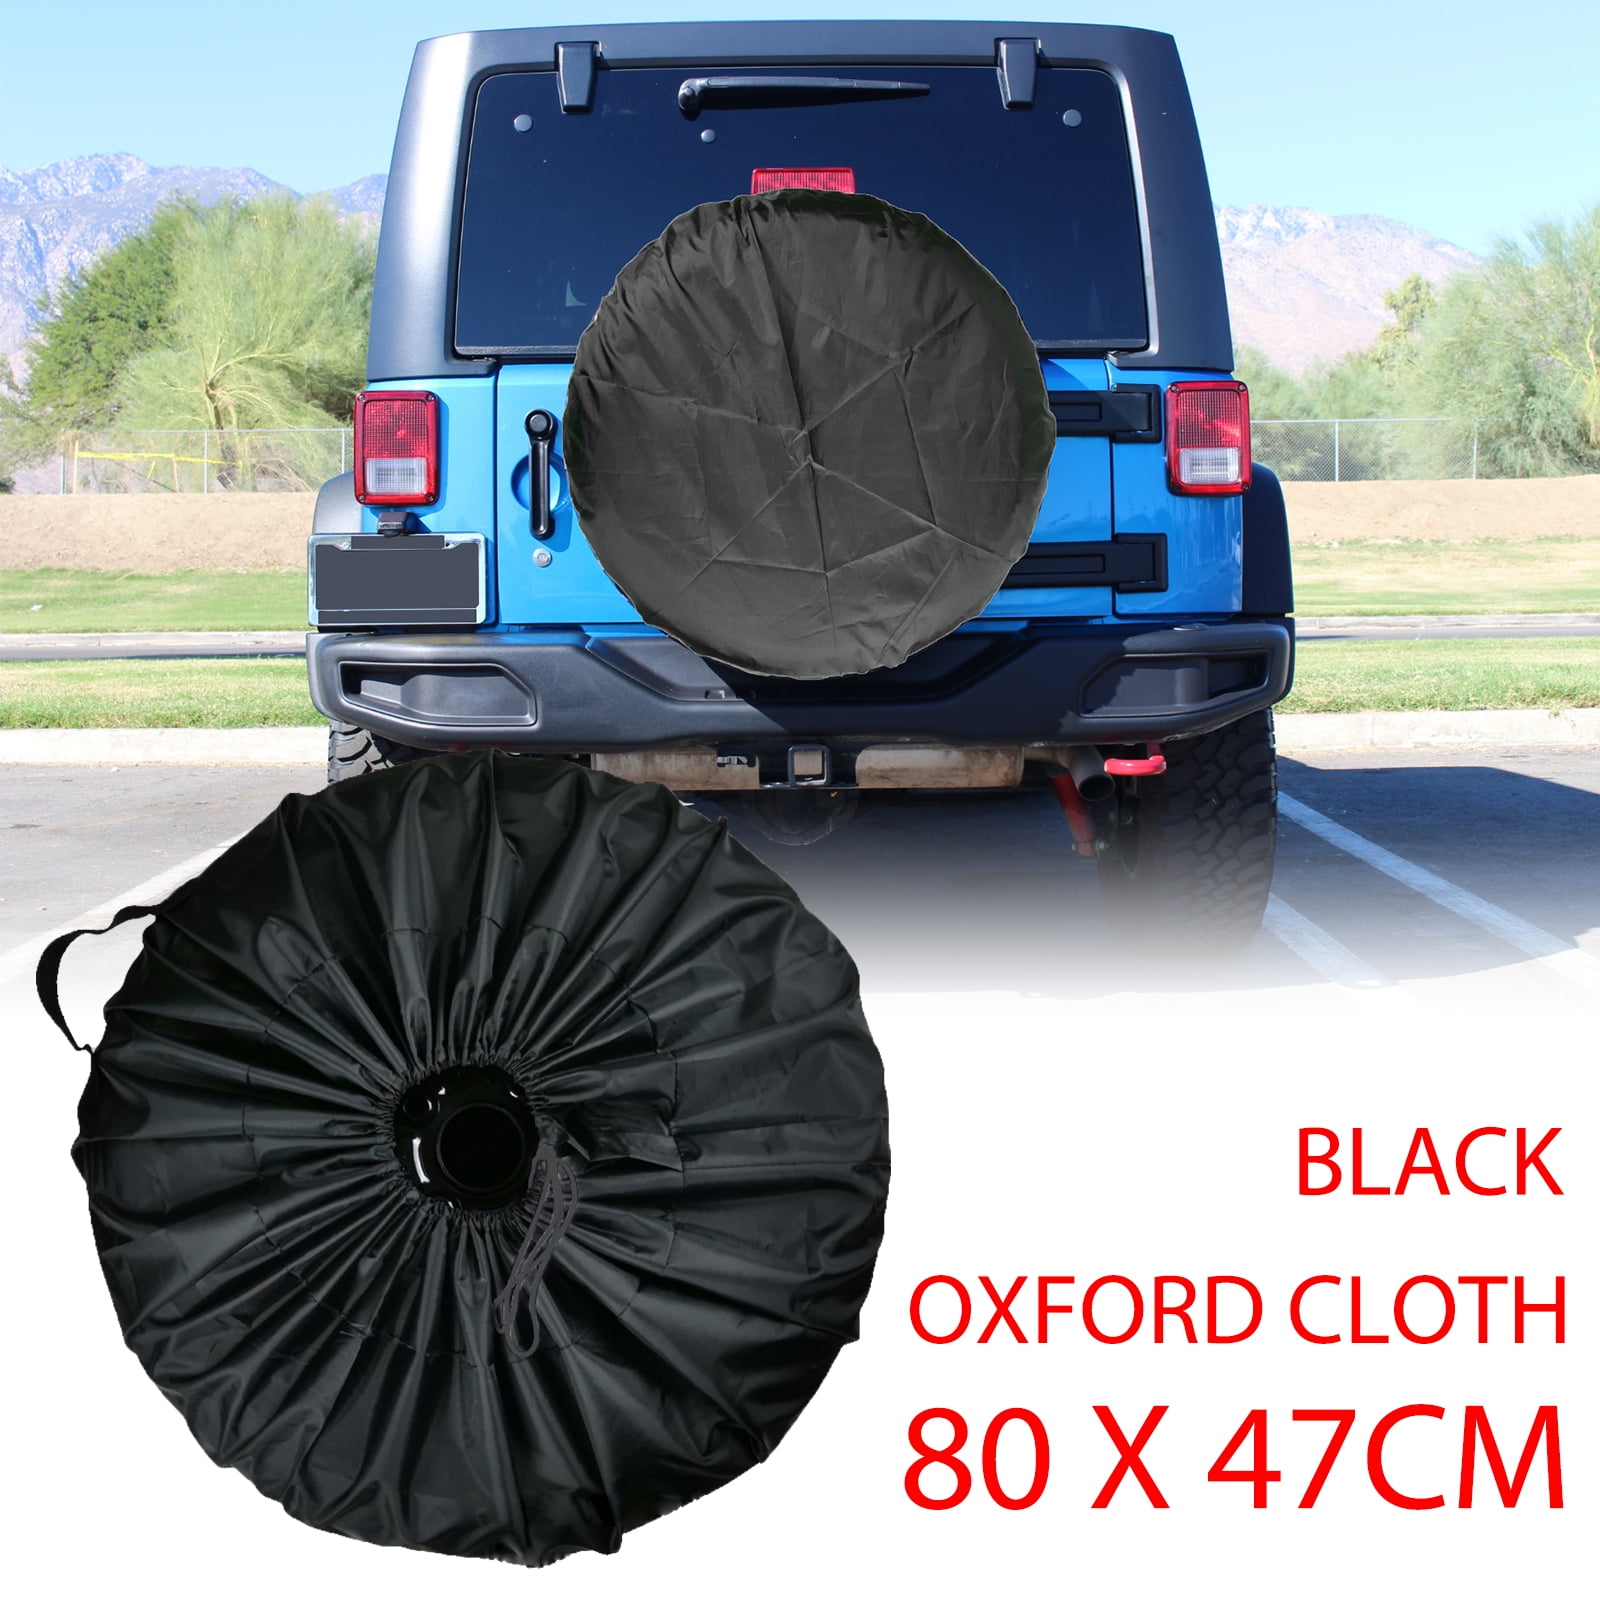 14 Inch SUV Black Wheel Cover Waterproof PVC Leather Dust-Proof Universal Fit for Jeep RV Spare Tire Cover Trailer Camper and Vehicle